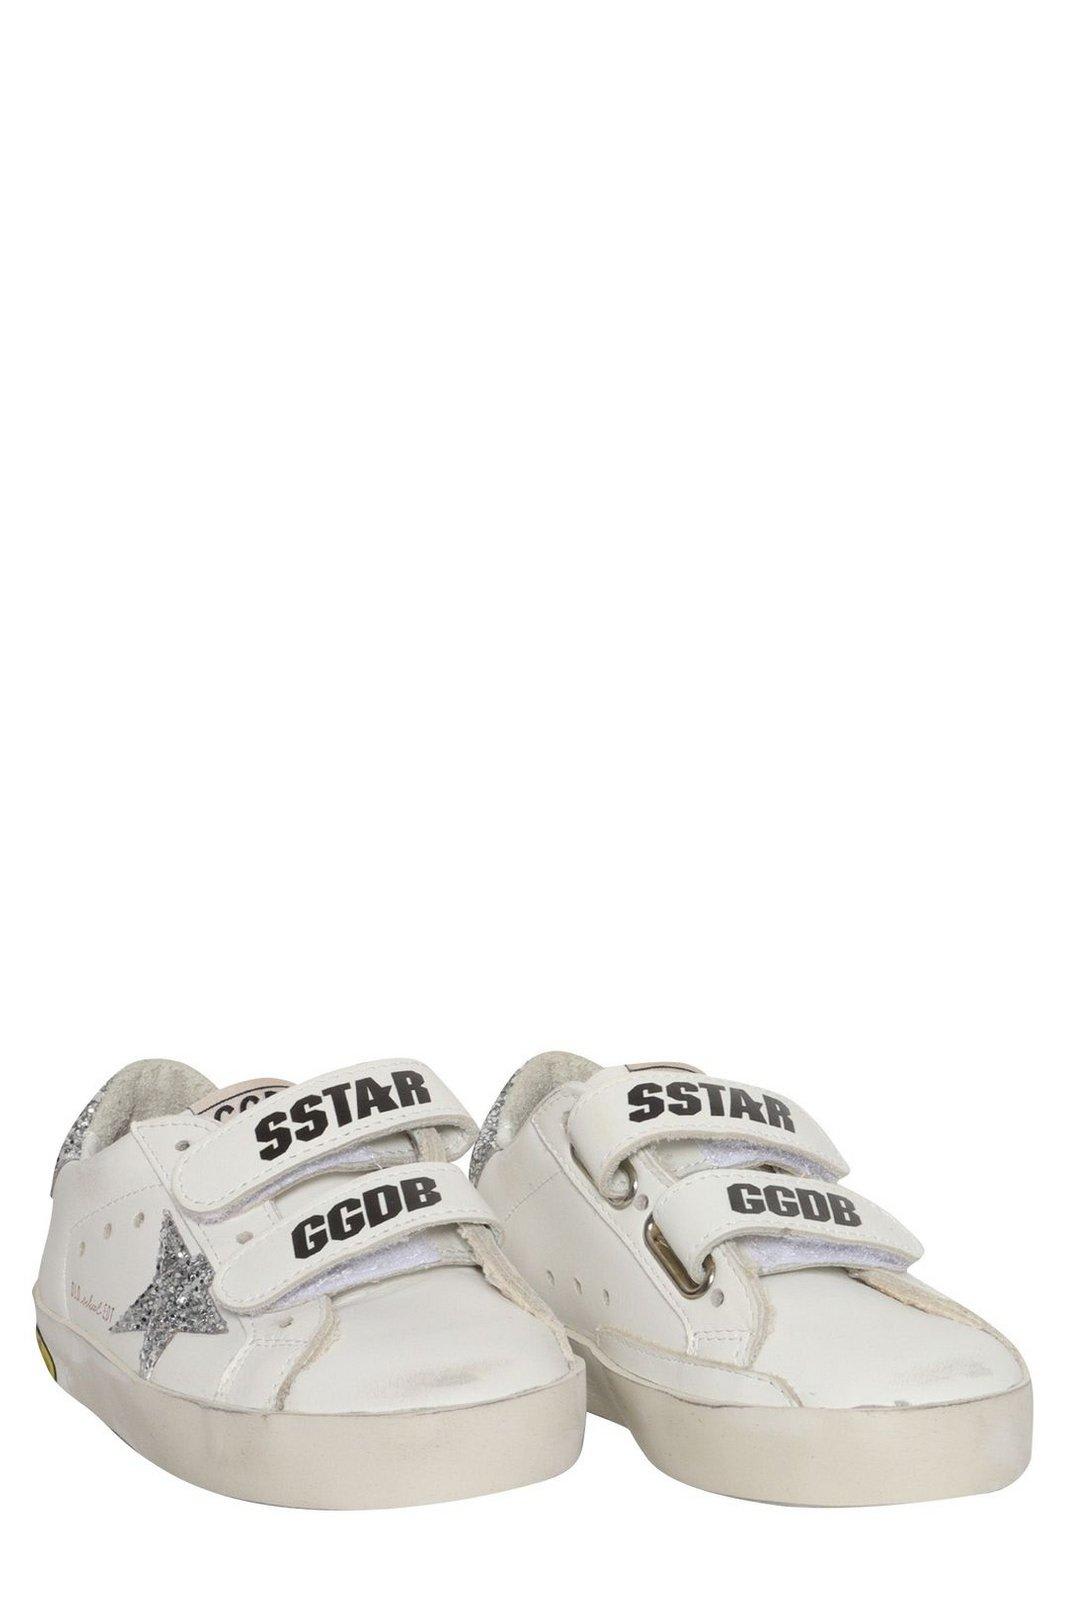 Shop Golden Goose Old School Star Patch Sneakers In White/ice/silver